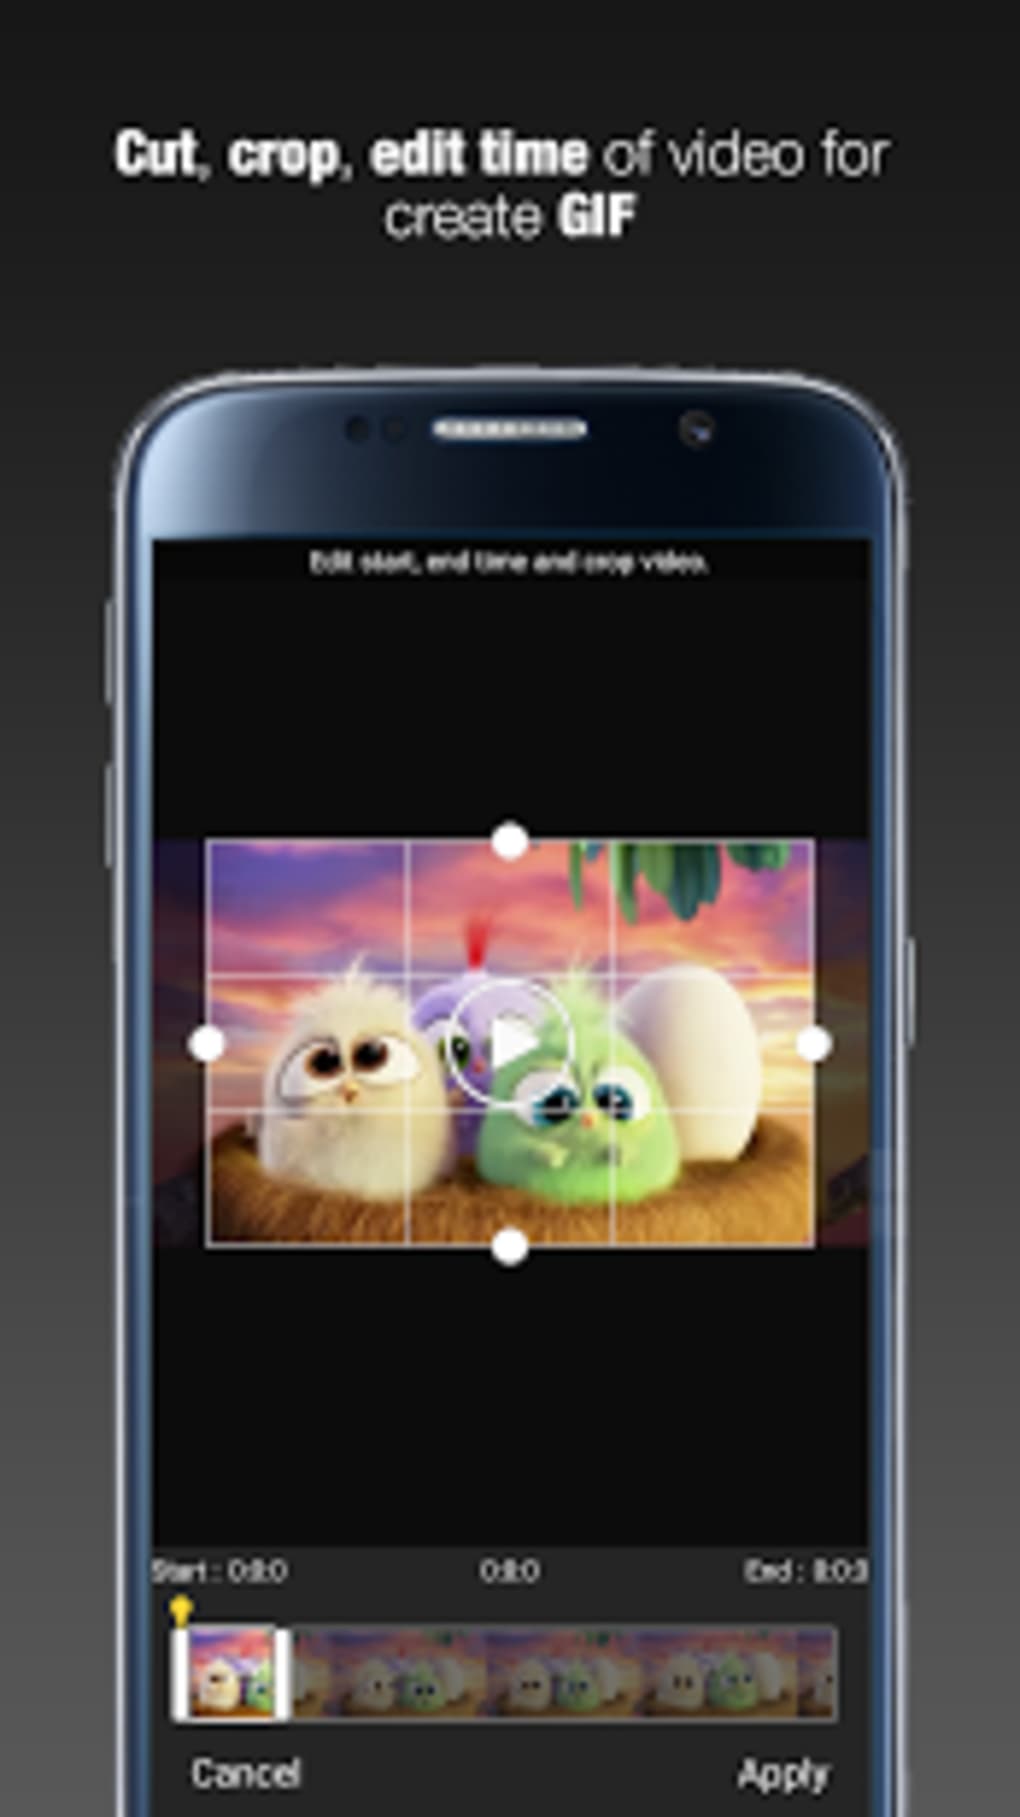 🔥 Download GIF Maker GIF Editor Video to GIF Pro 1.7.11.496Q